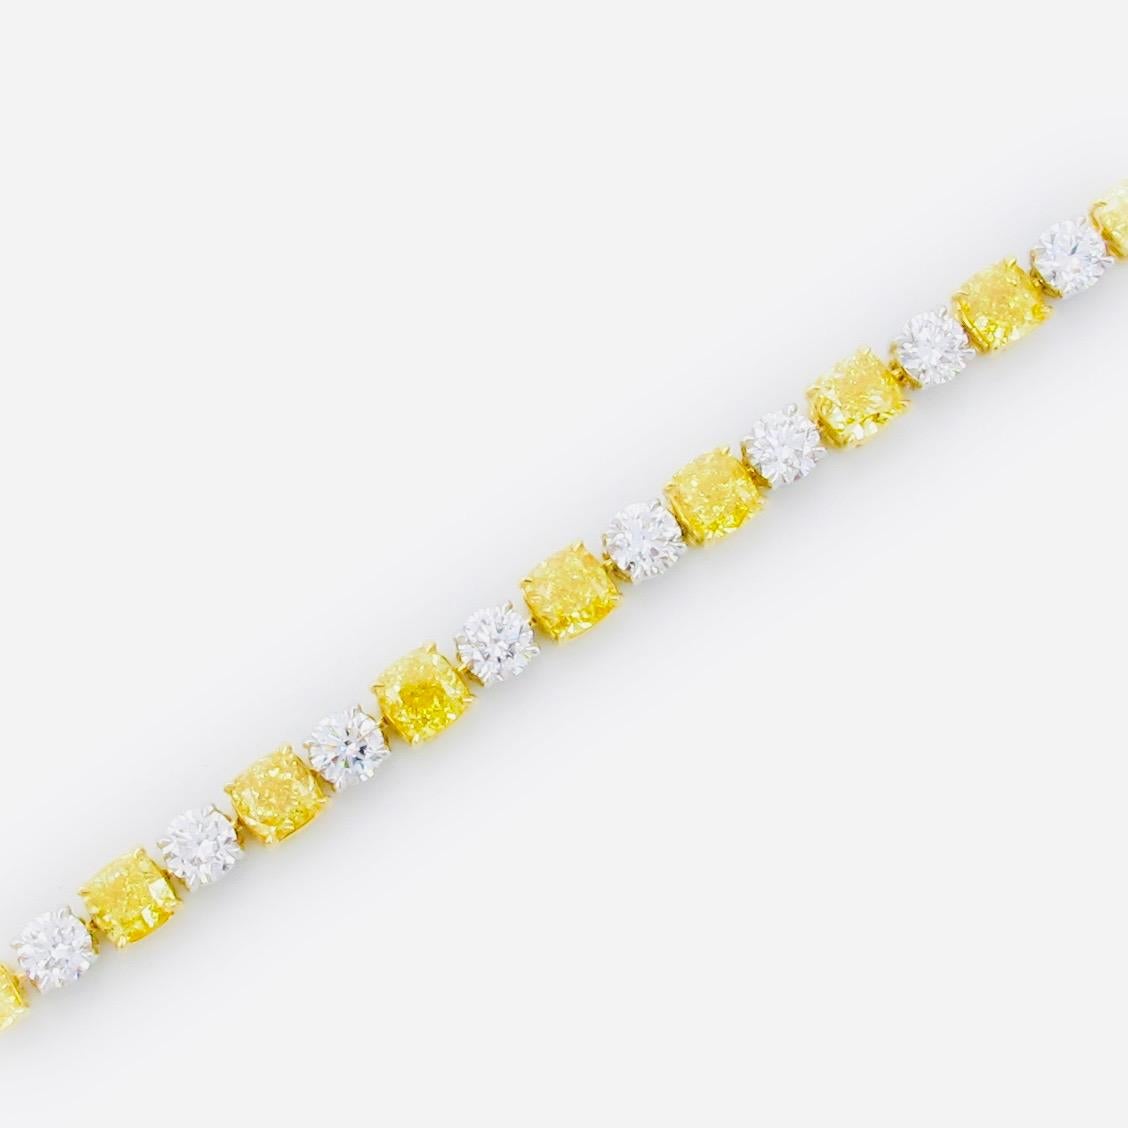 From The Museum Vault At Emilio Jewelry New York,
The most spectacular yellow diamond bracelet that exists! Filled with tremendous fire, sparkle and dance the center diamond is a dream for whoever will own it. Each and every diamond is Gia certified